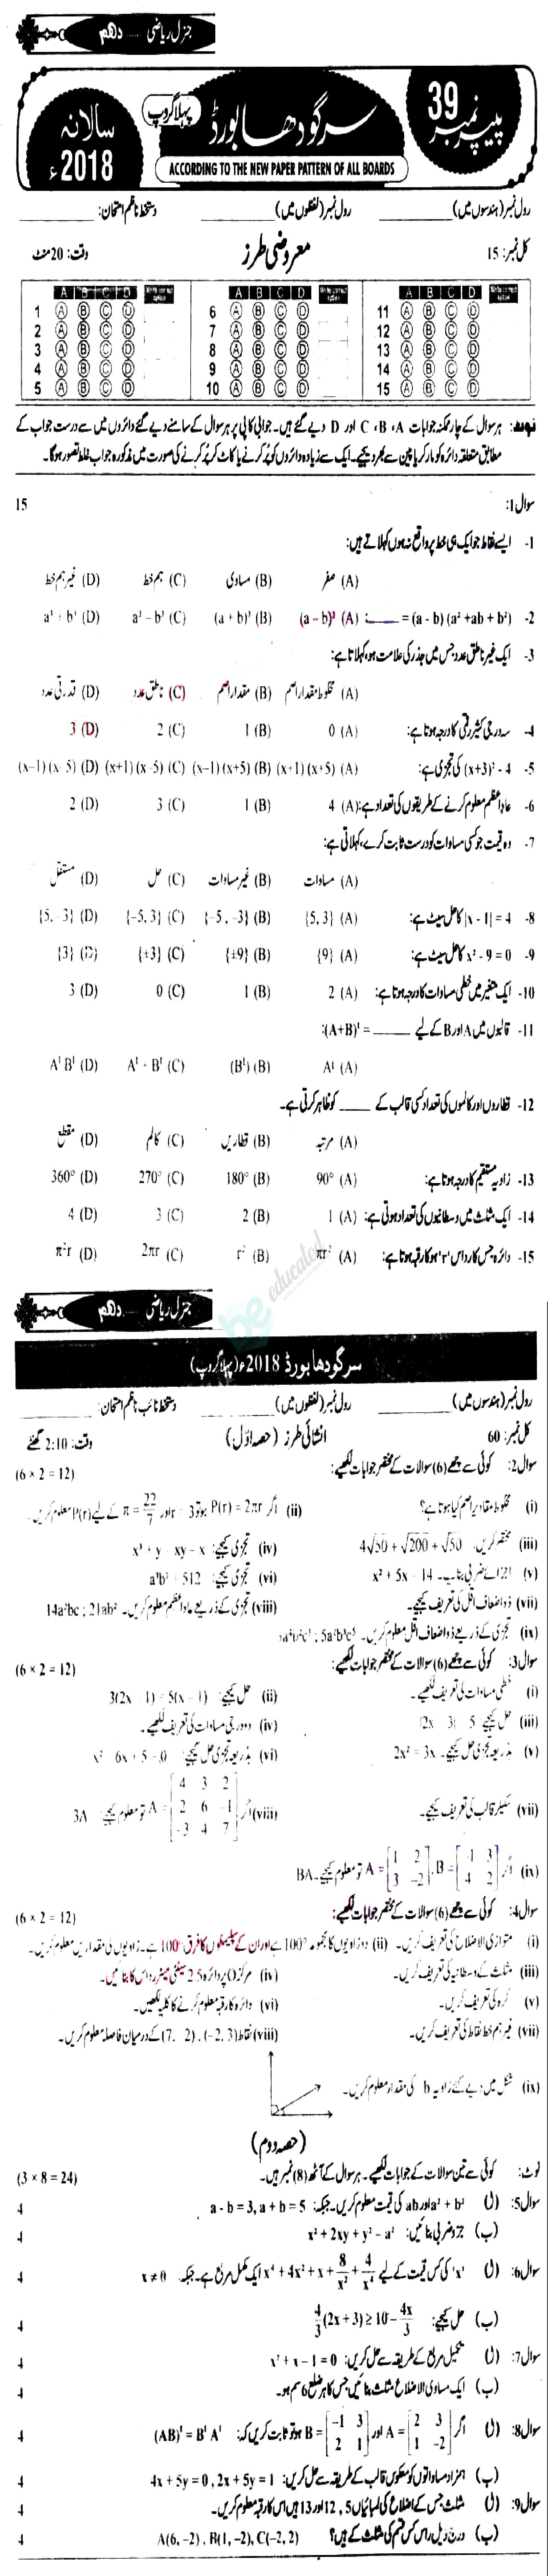 General Math 10th class Past Paper Group 1 BISE Sargodha 2018